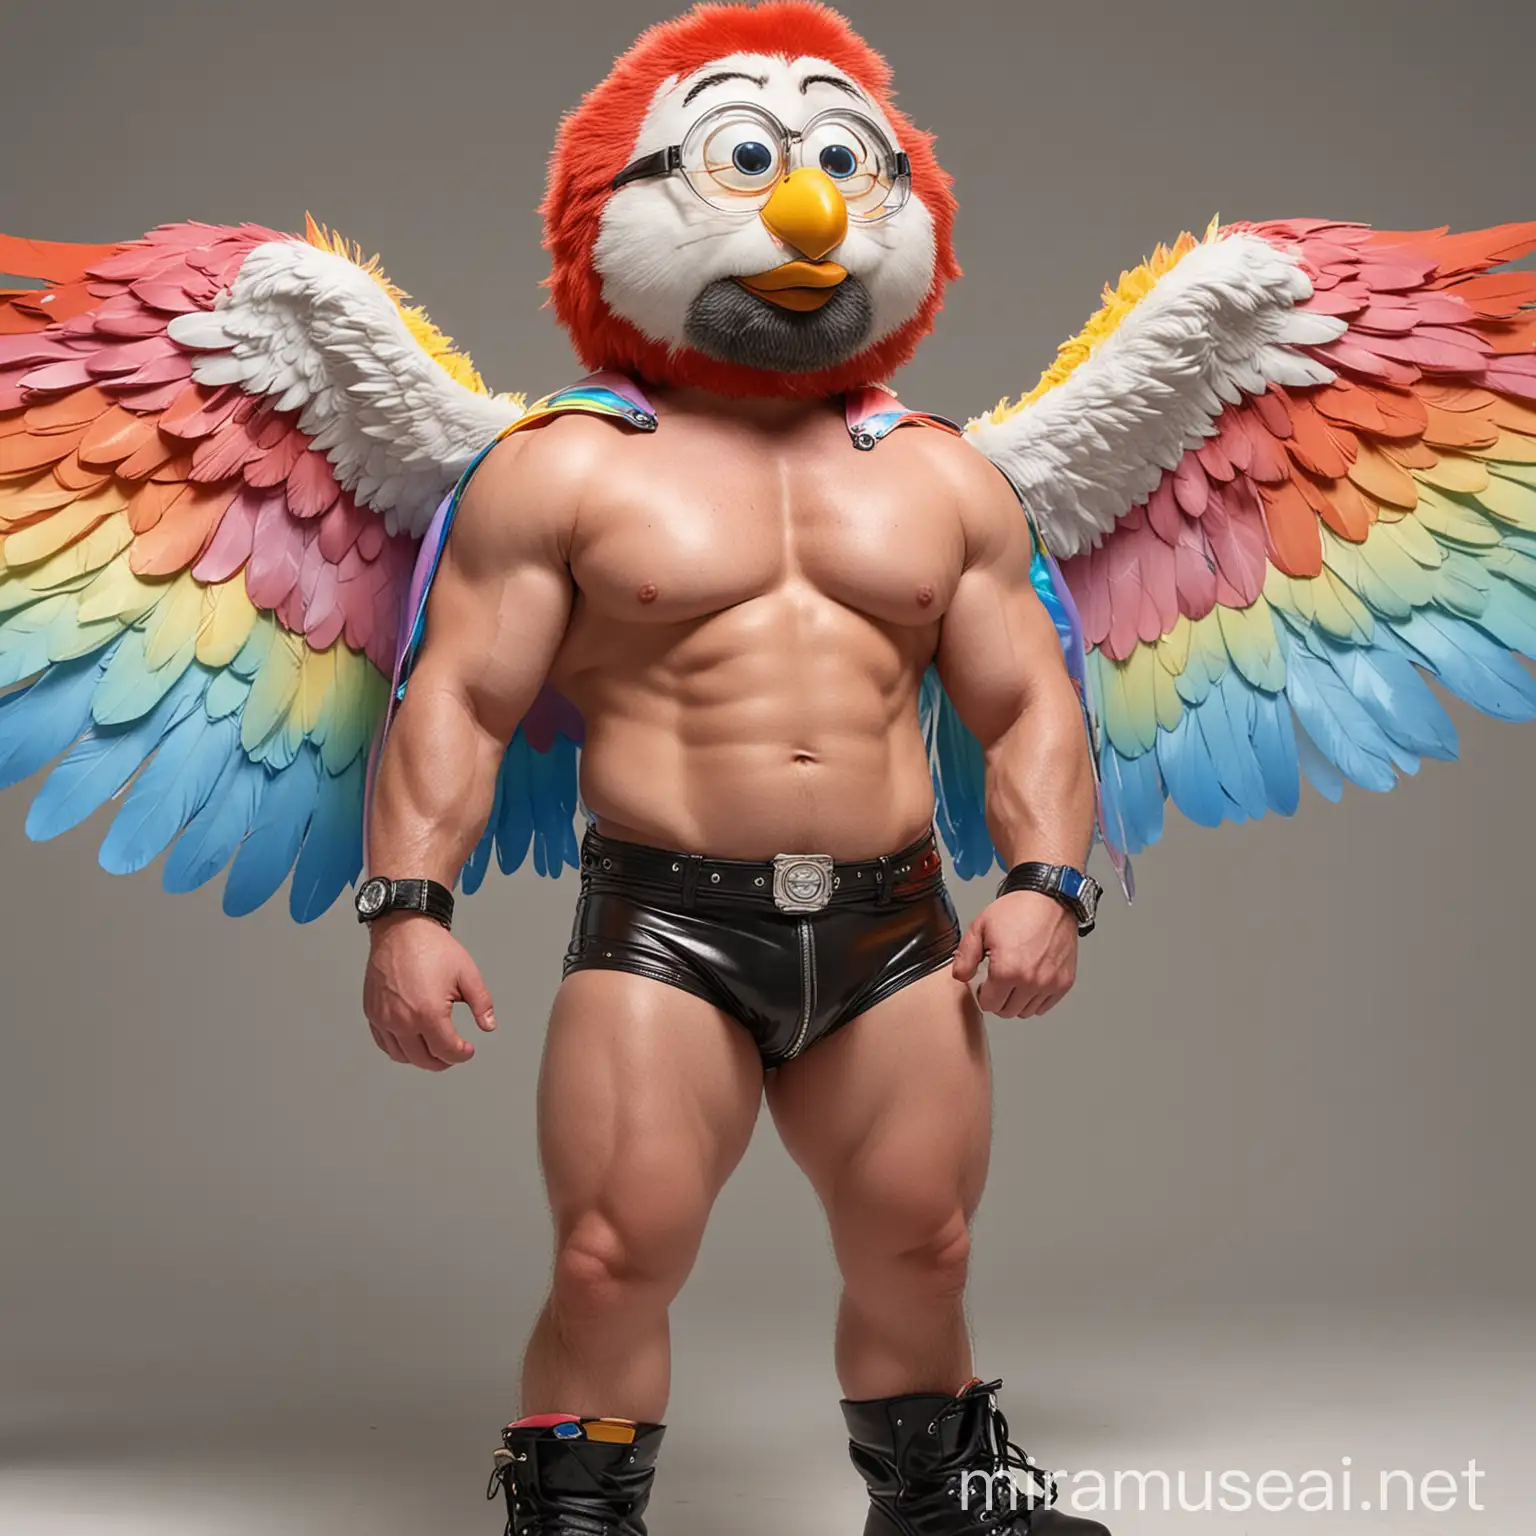 Smiling Topless Bodybuilder Daddy with RainbowColored Wings and Doraemon Goggles